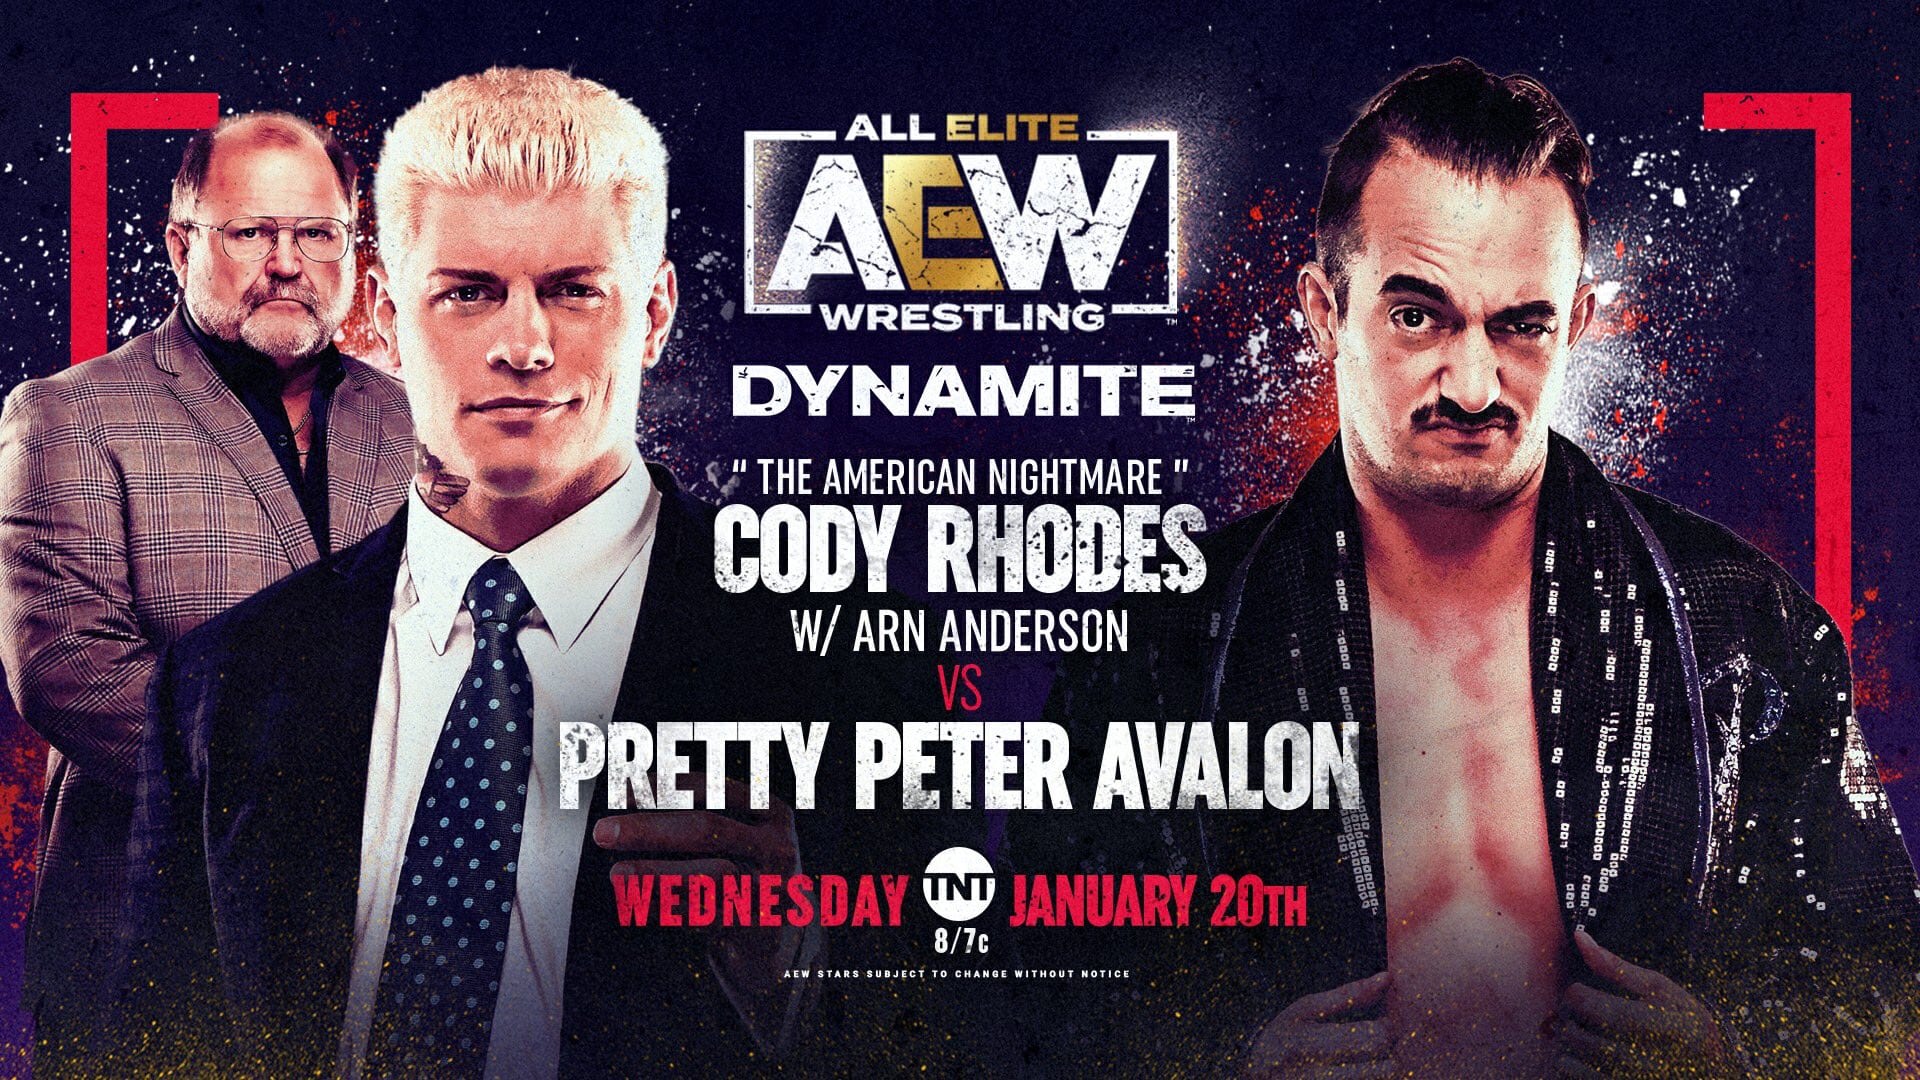 Another Match Made Official For Next Week’s AEW Dynamite